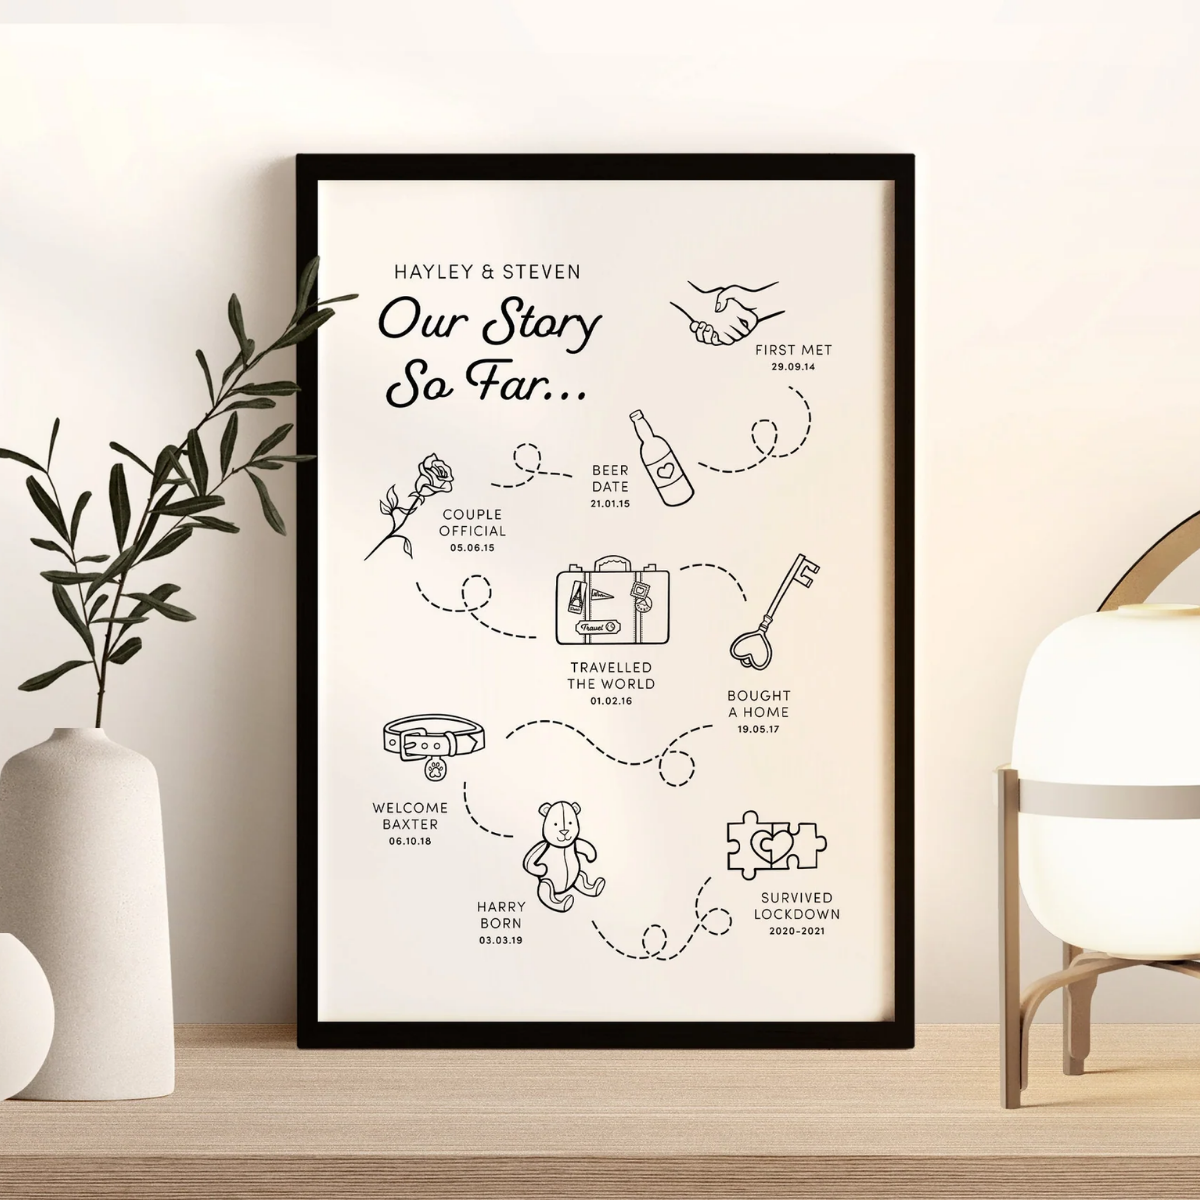 29. Love Story Timeline Print: A Unique and Personalized Anniversary Gift for Him